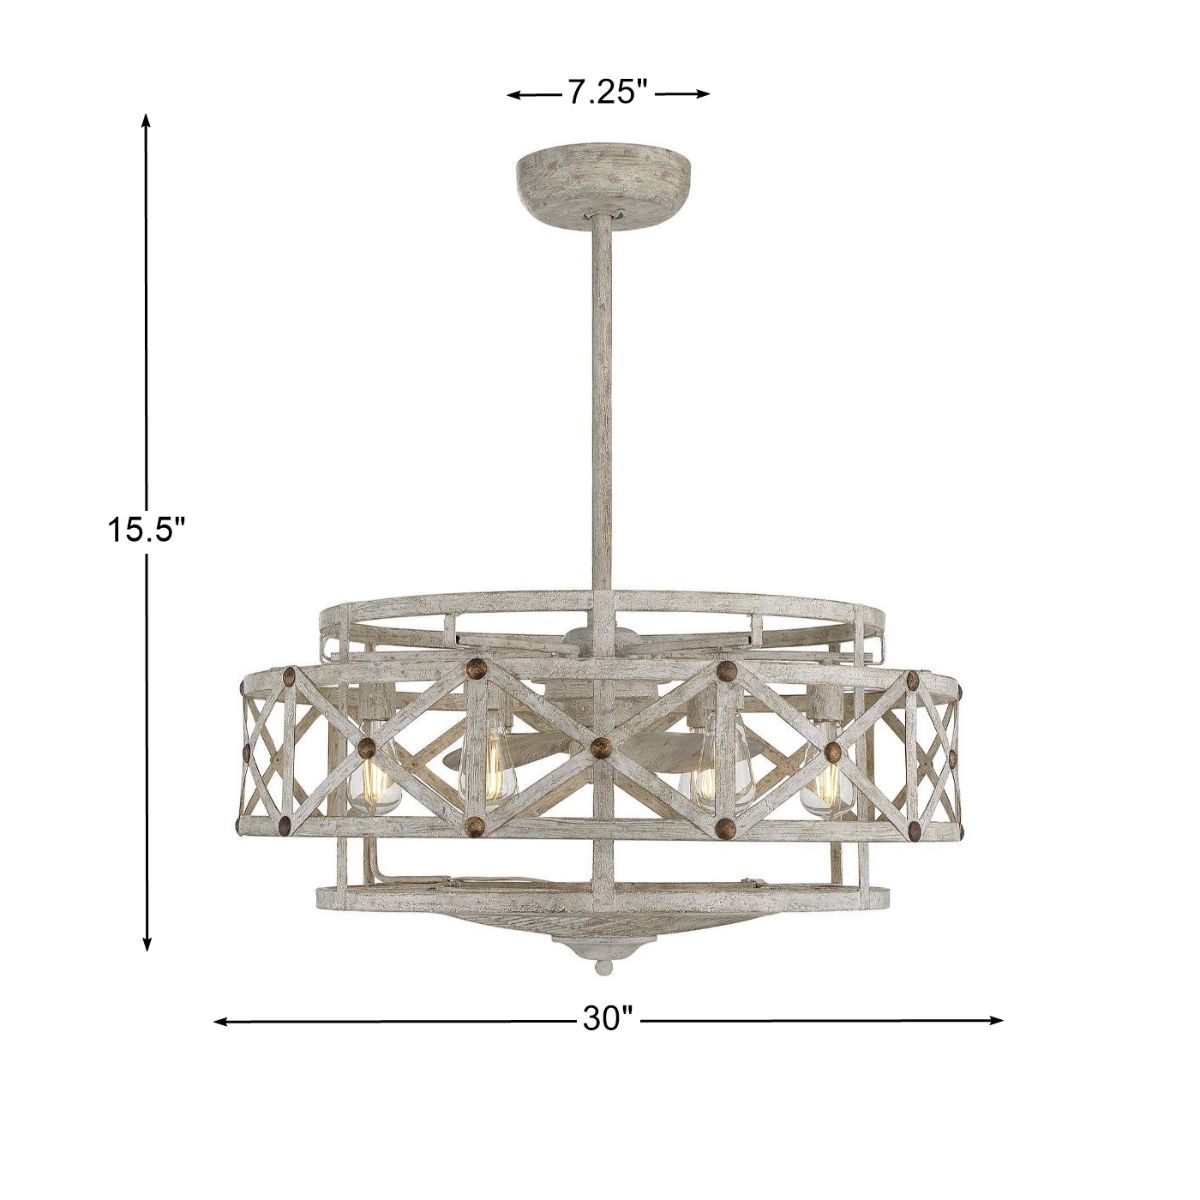 Colonade 30 Inch Chandelier Ceiling Fan With Light And Remote, Provence with Gold Accents Finish - Bees Lighting